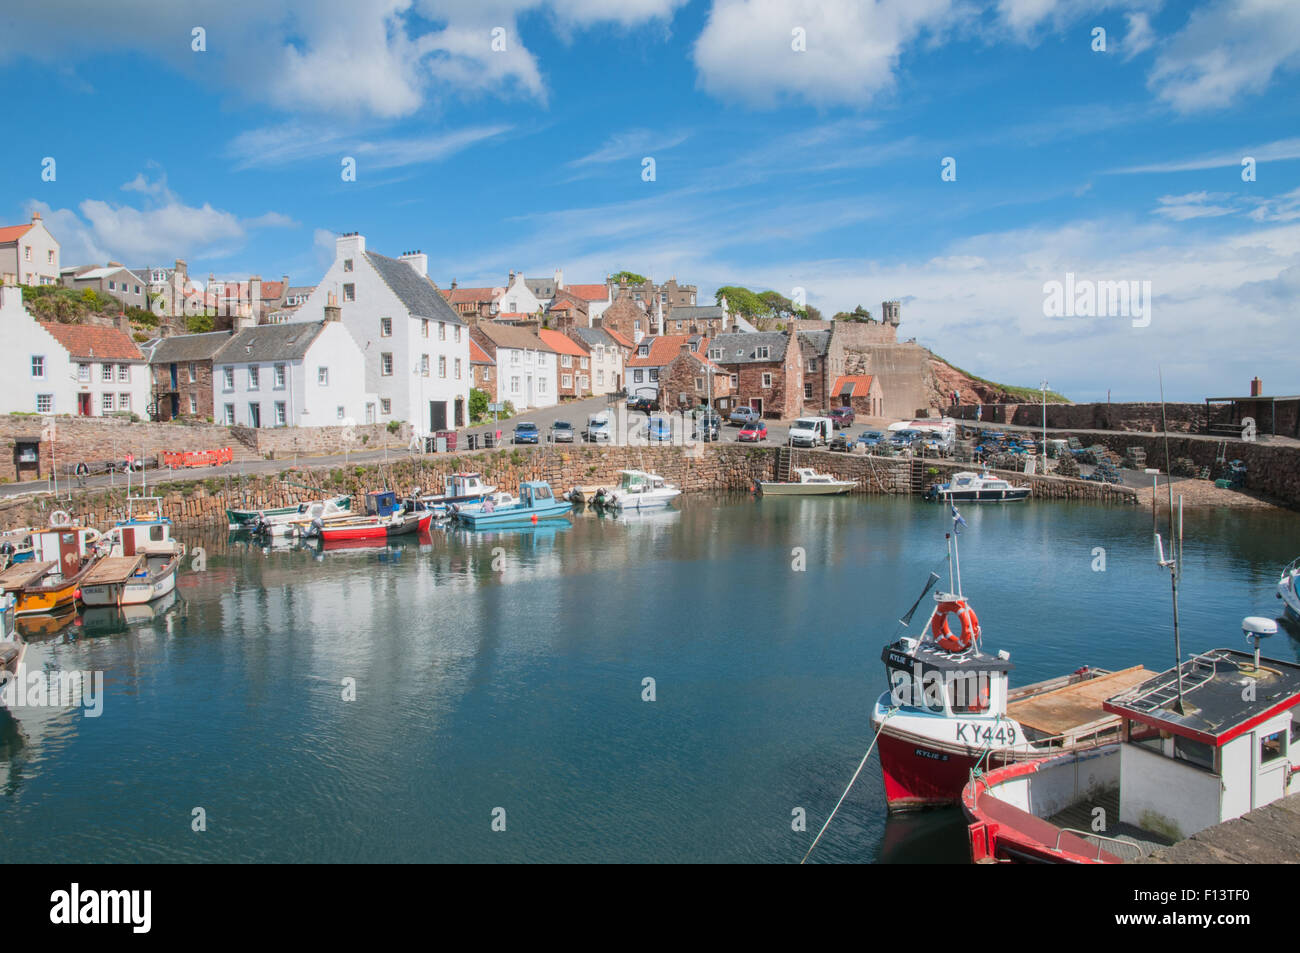 Fishing boats in Crail Harbour East neuk Fife Scotland Stock Photo